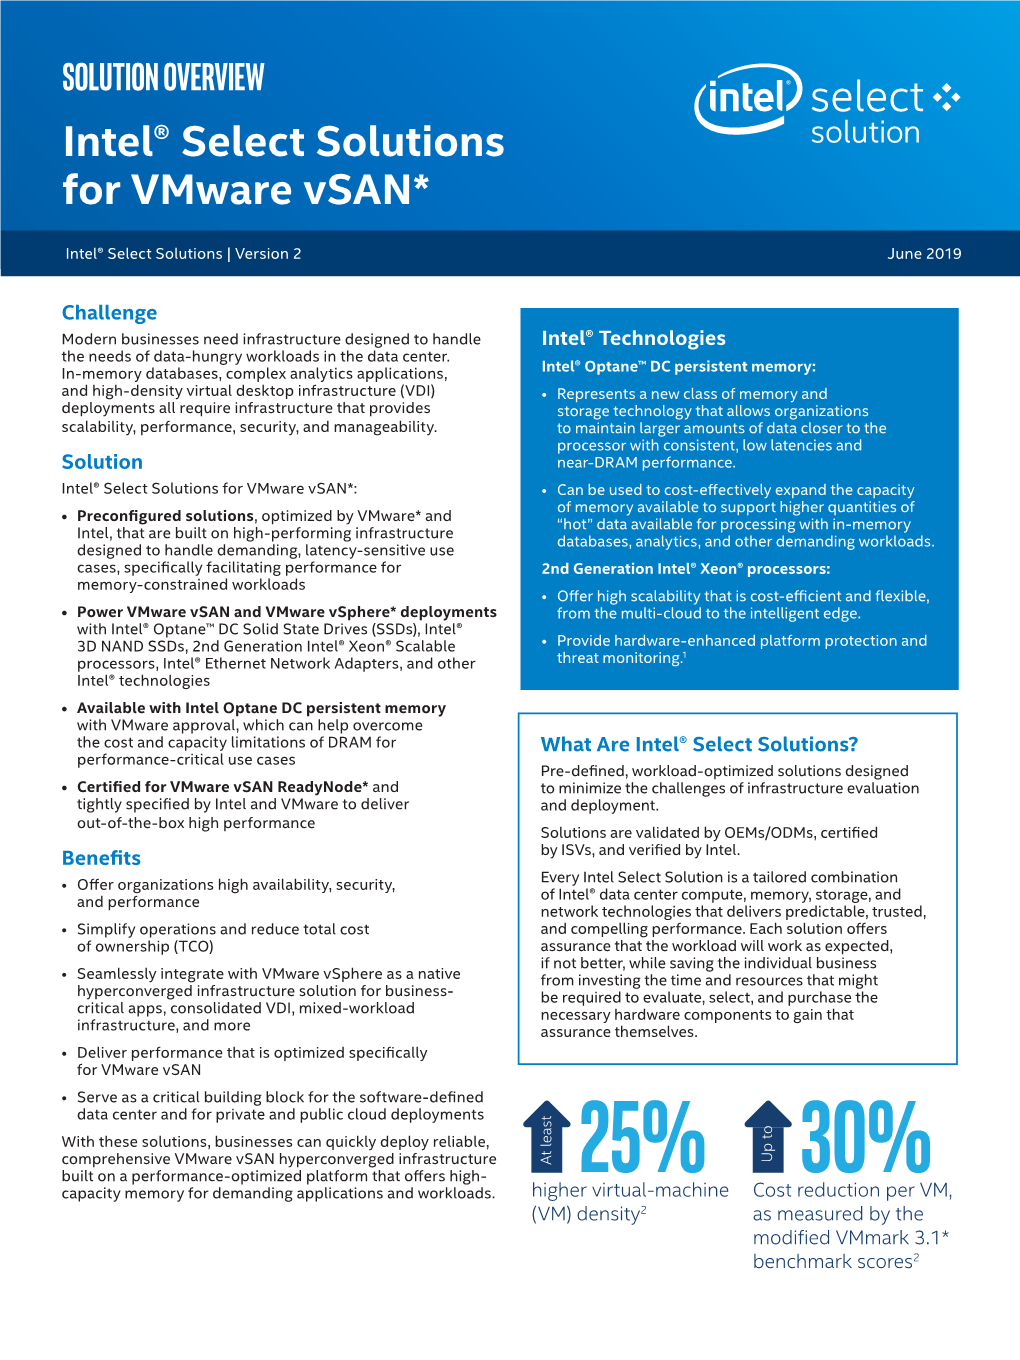 Intel® Select Solutions for Vmware Vsan*